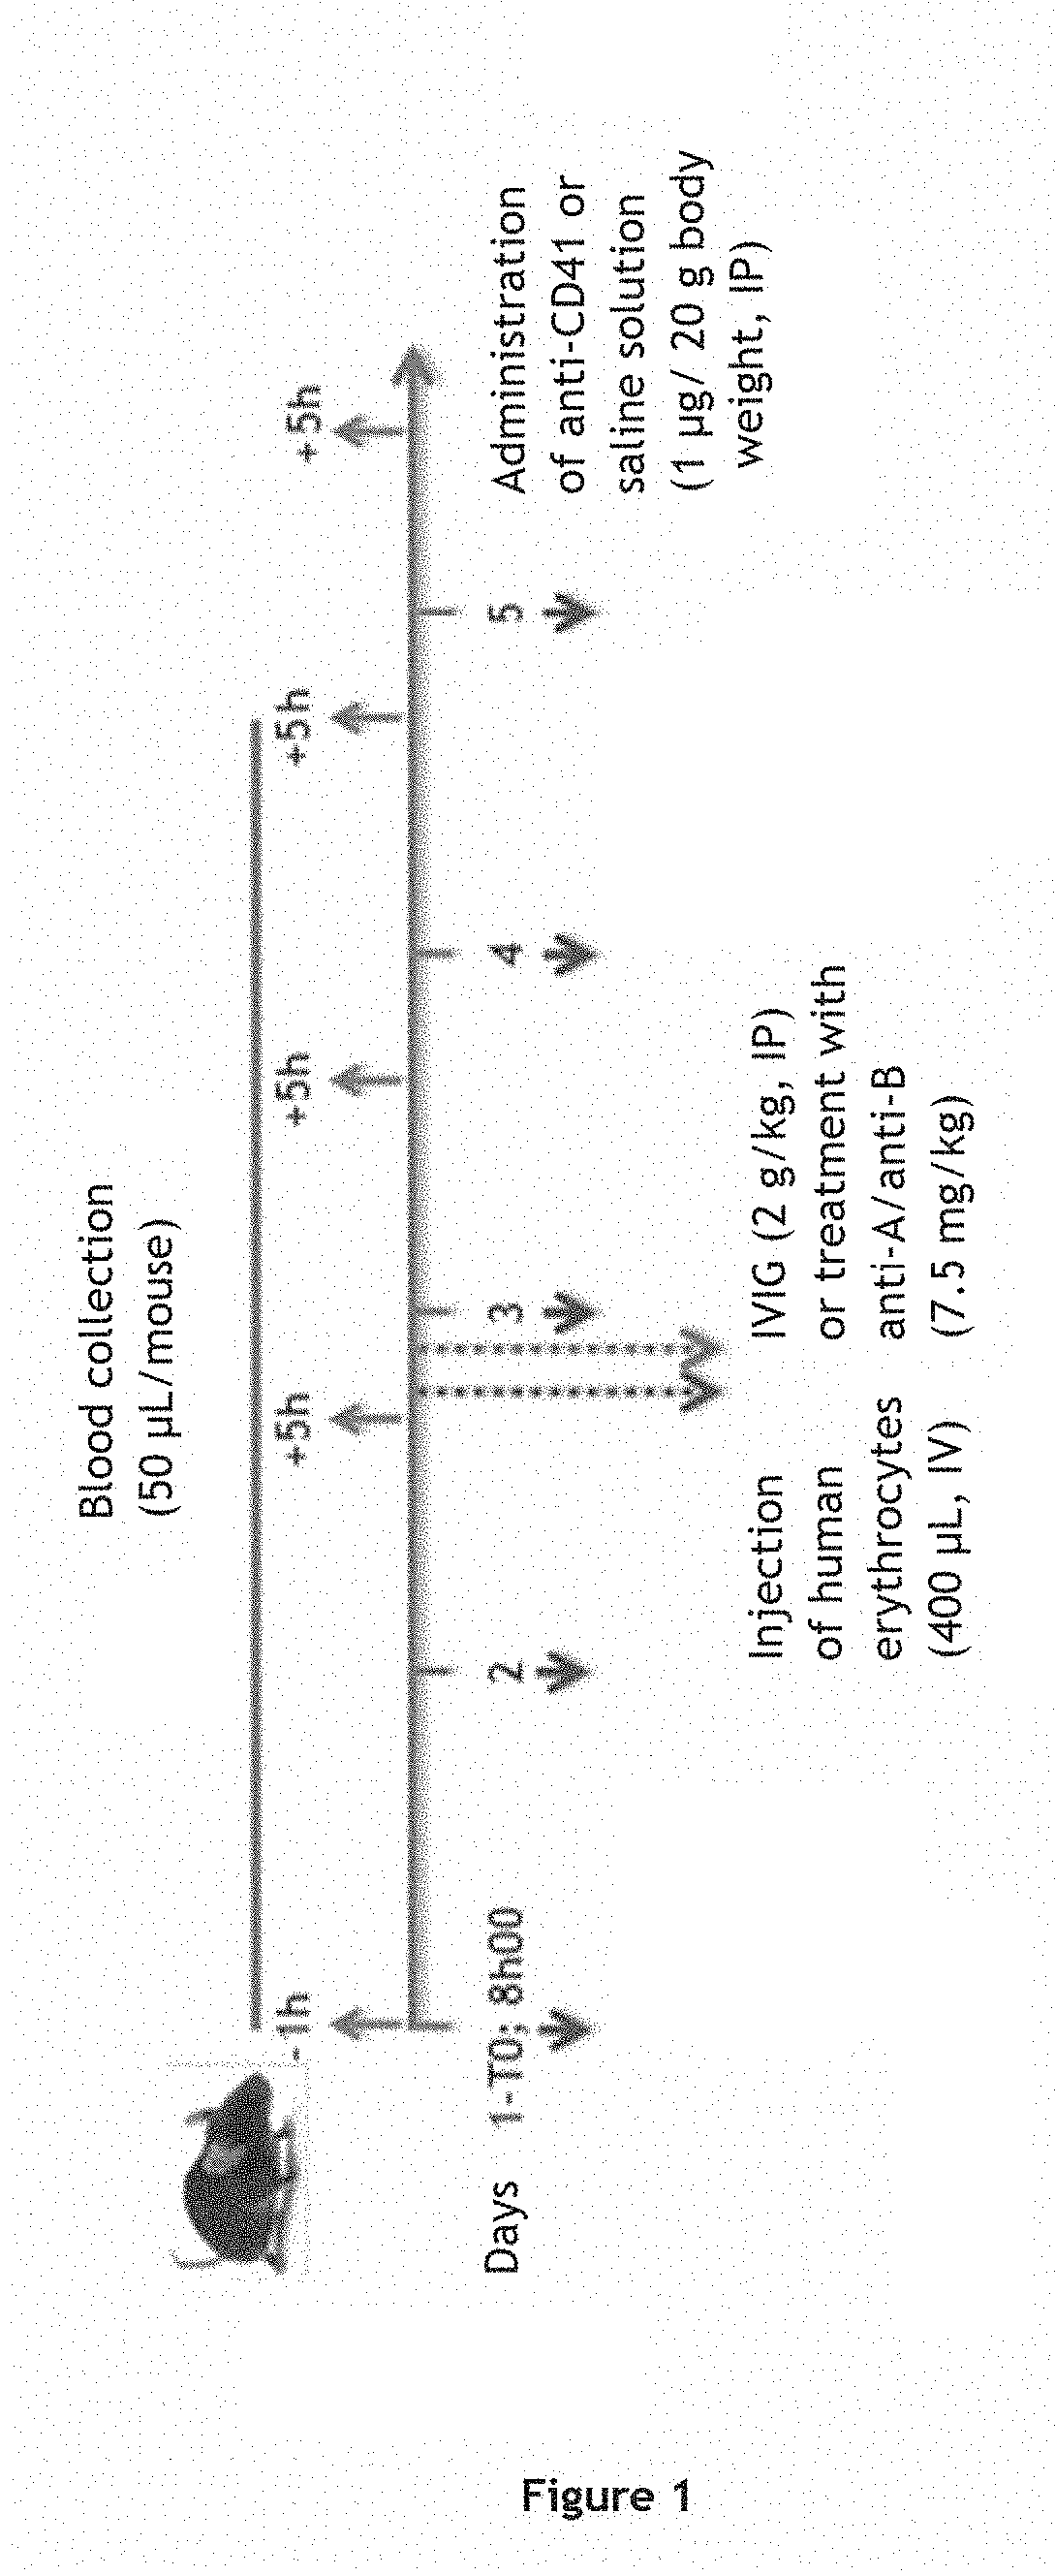 Composition enriched in Anti-a and/or Anti-b polyclonal immunoglobulins for use in the treatment of autoimmune diseases or polycythemia